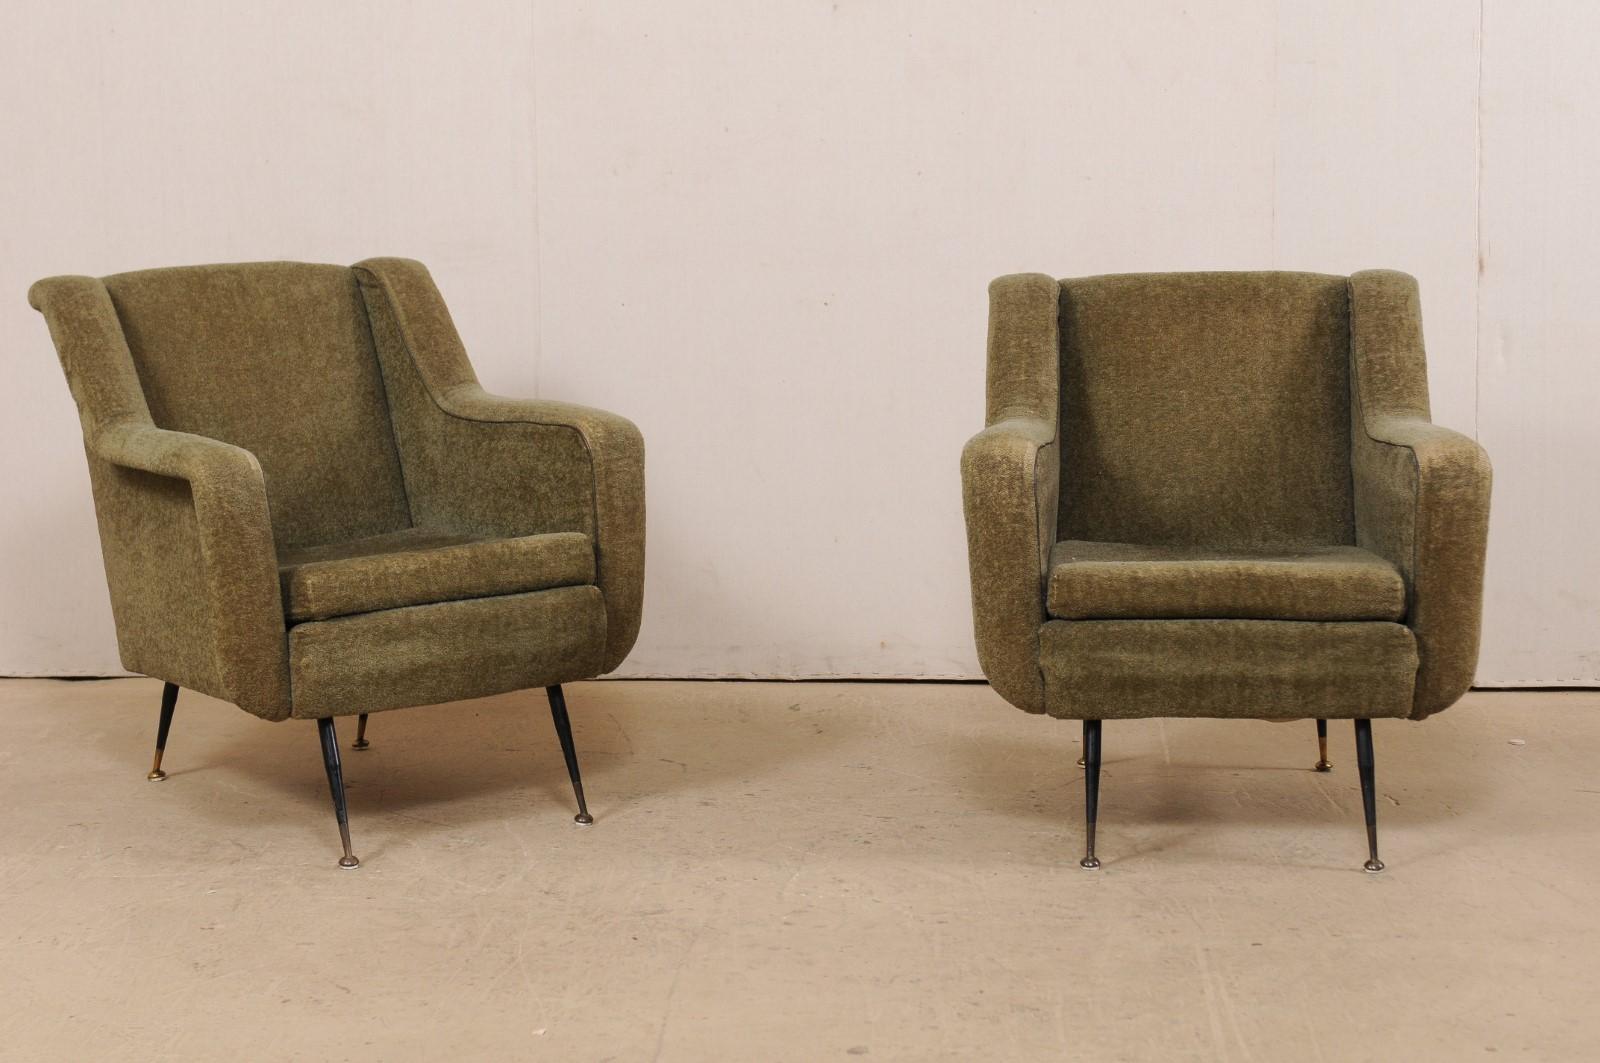 An Italian pair of upholstered club chairs from the mid-20th century. This midcentury pair of armchairs from Italy have a comfortably modern design with squared seats and backs, and a nicely pronounced lip that extends along the sides of the backs